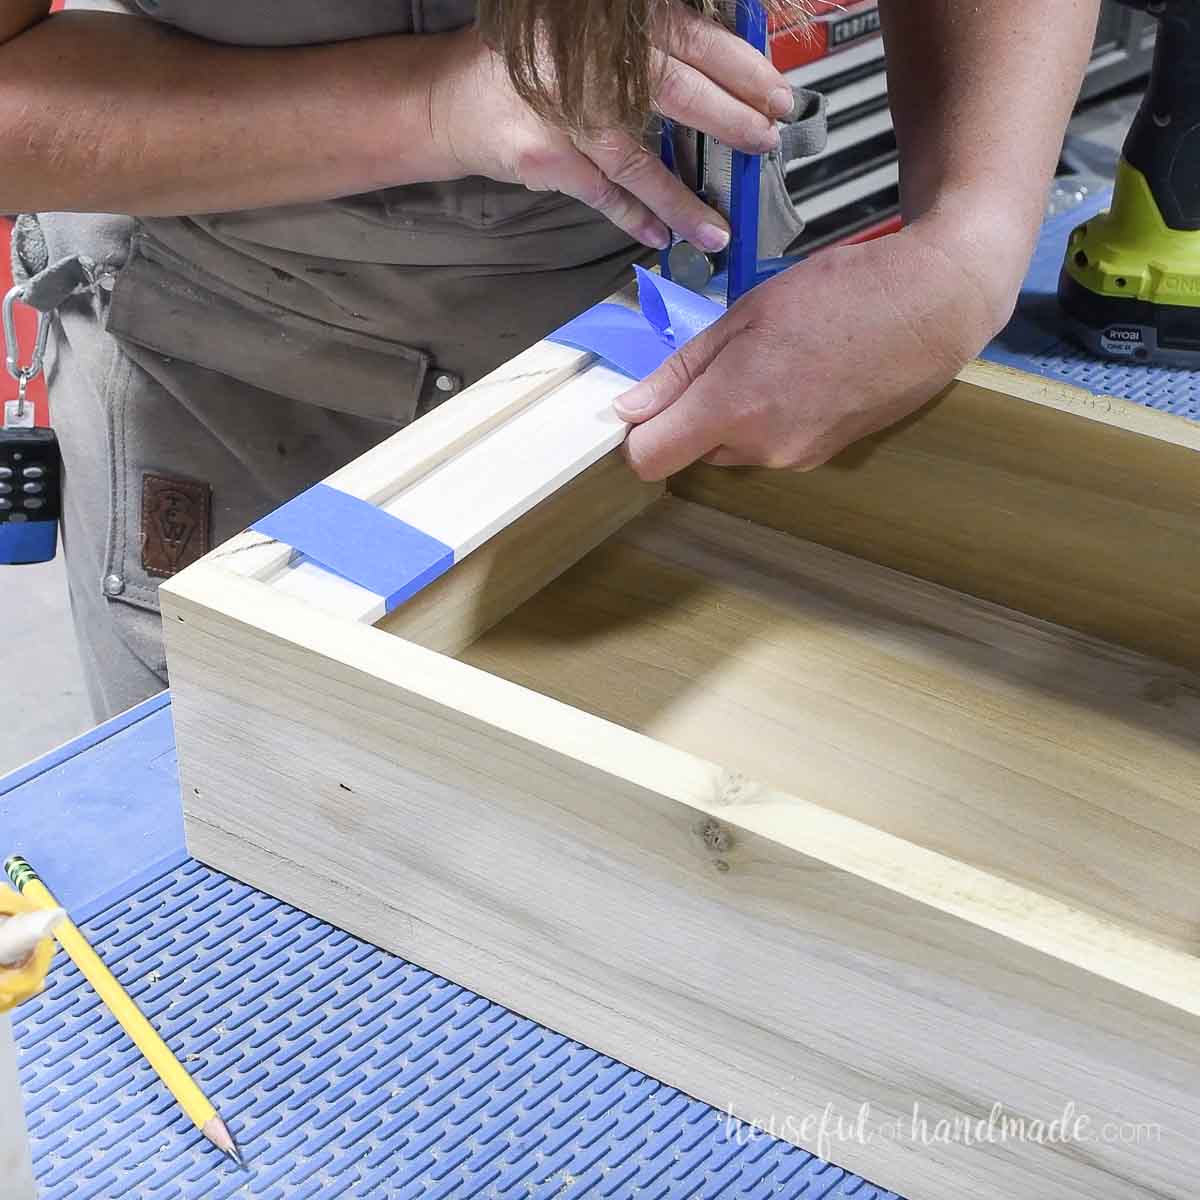 Glueing 1/4" boards into the bottom of the jewelry box and clamping with painters tape. 